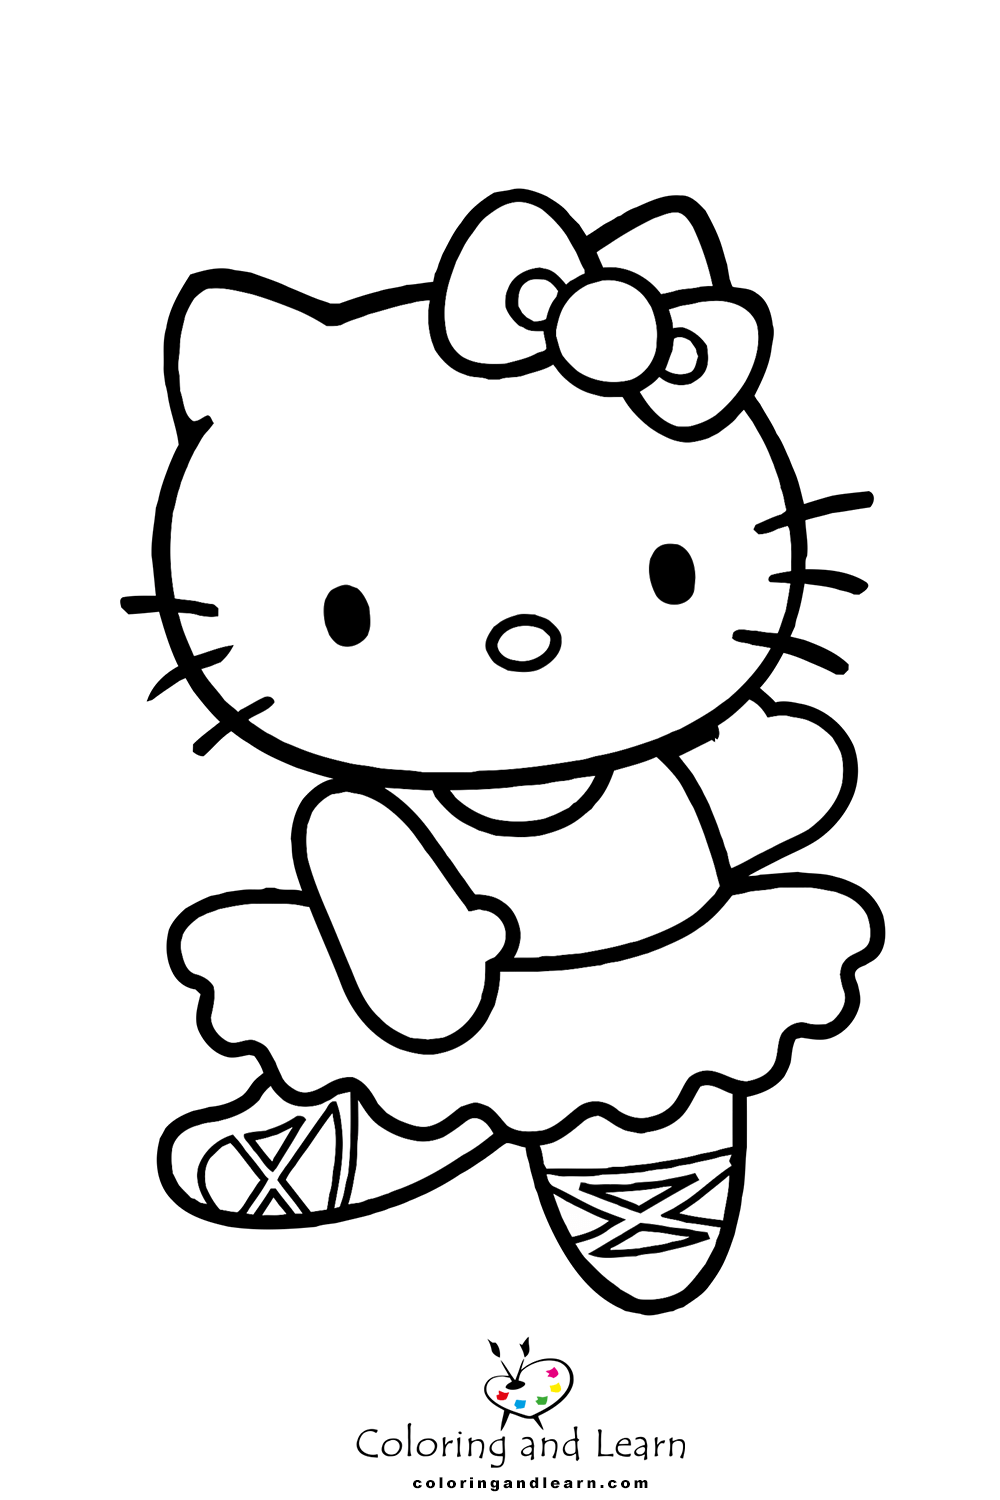 Image result for hello kitty coloring pages  Hello kitty colouring pages, Hello  kitty coloring, Kitty coloring